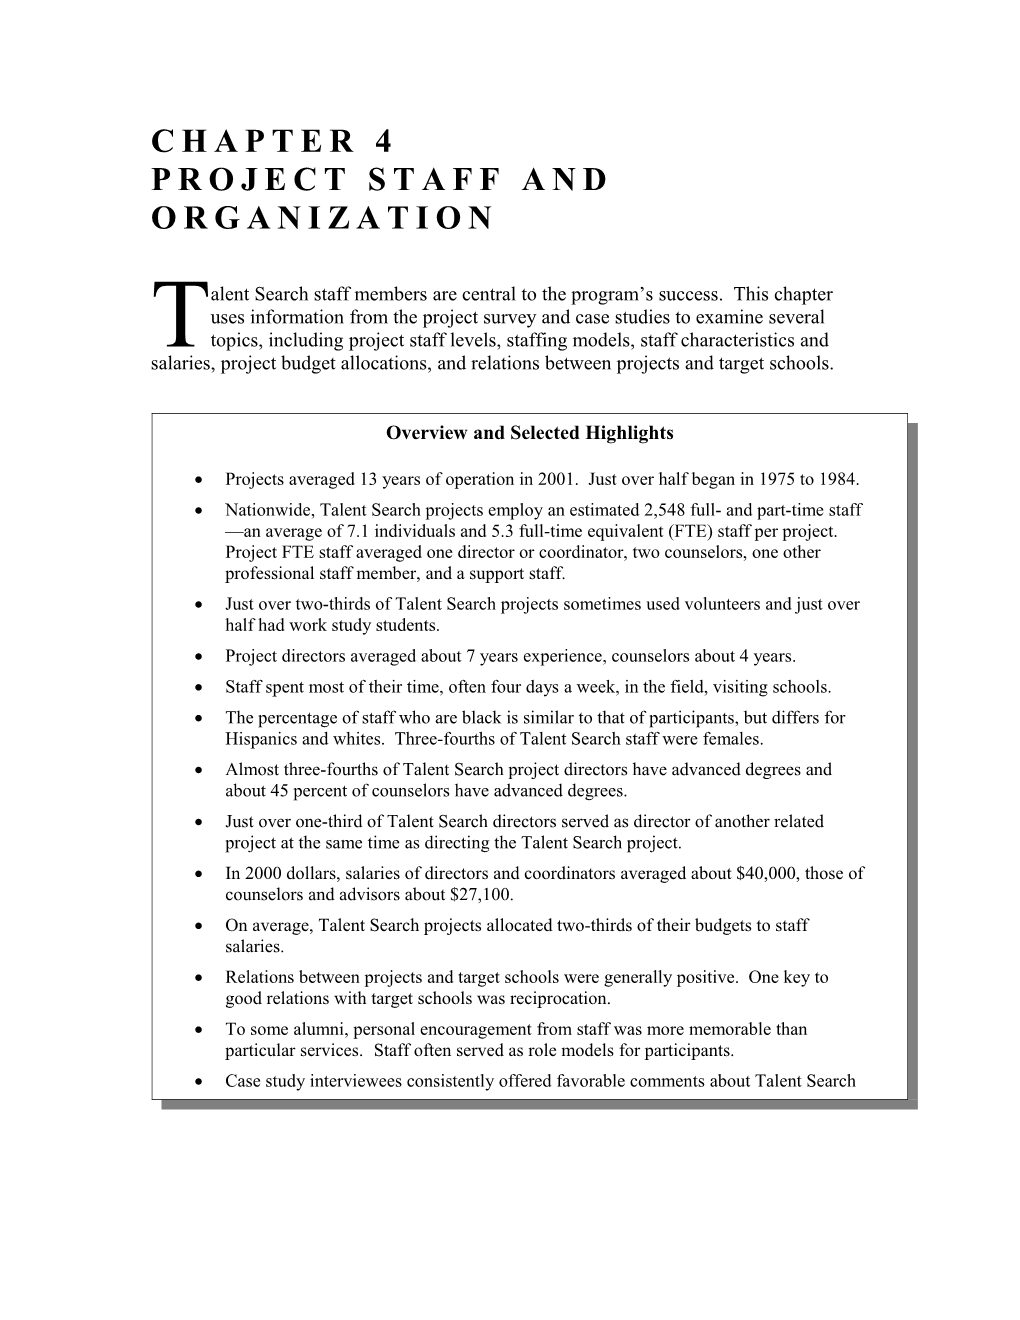 Chapter 4 Implementation of the Talent Search Program, Past and Present 2004 (Msword)